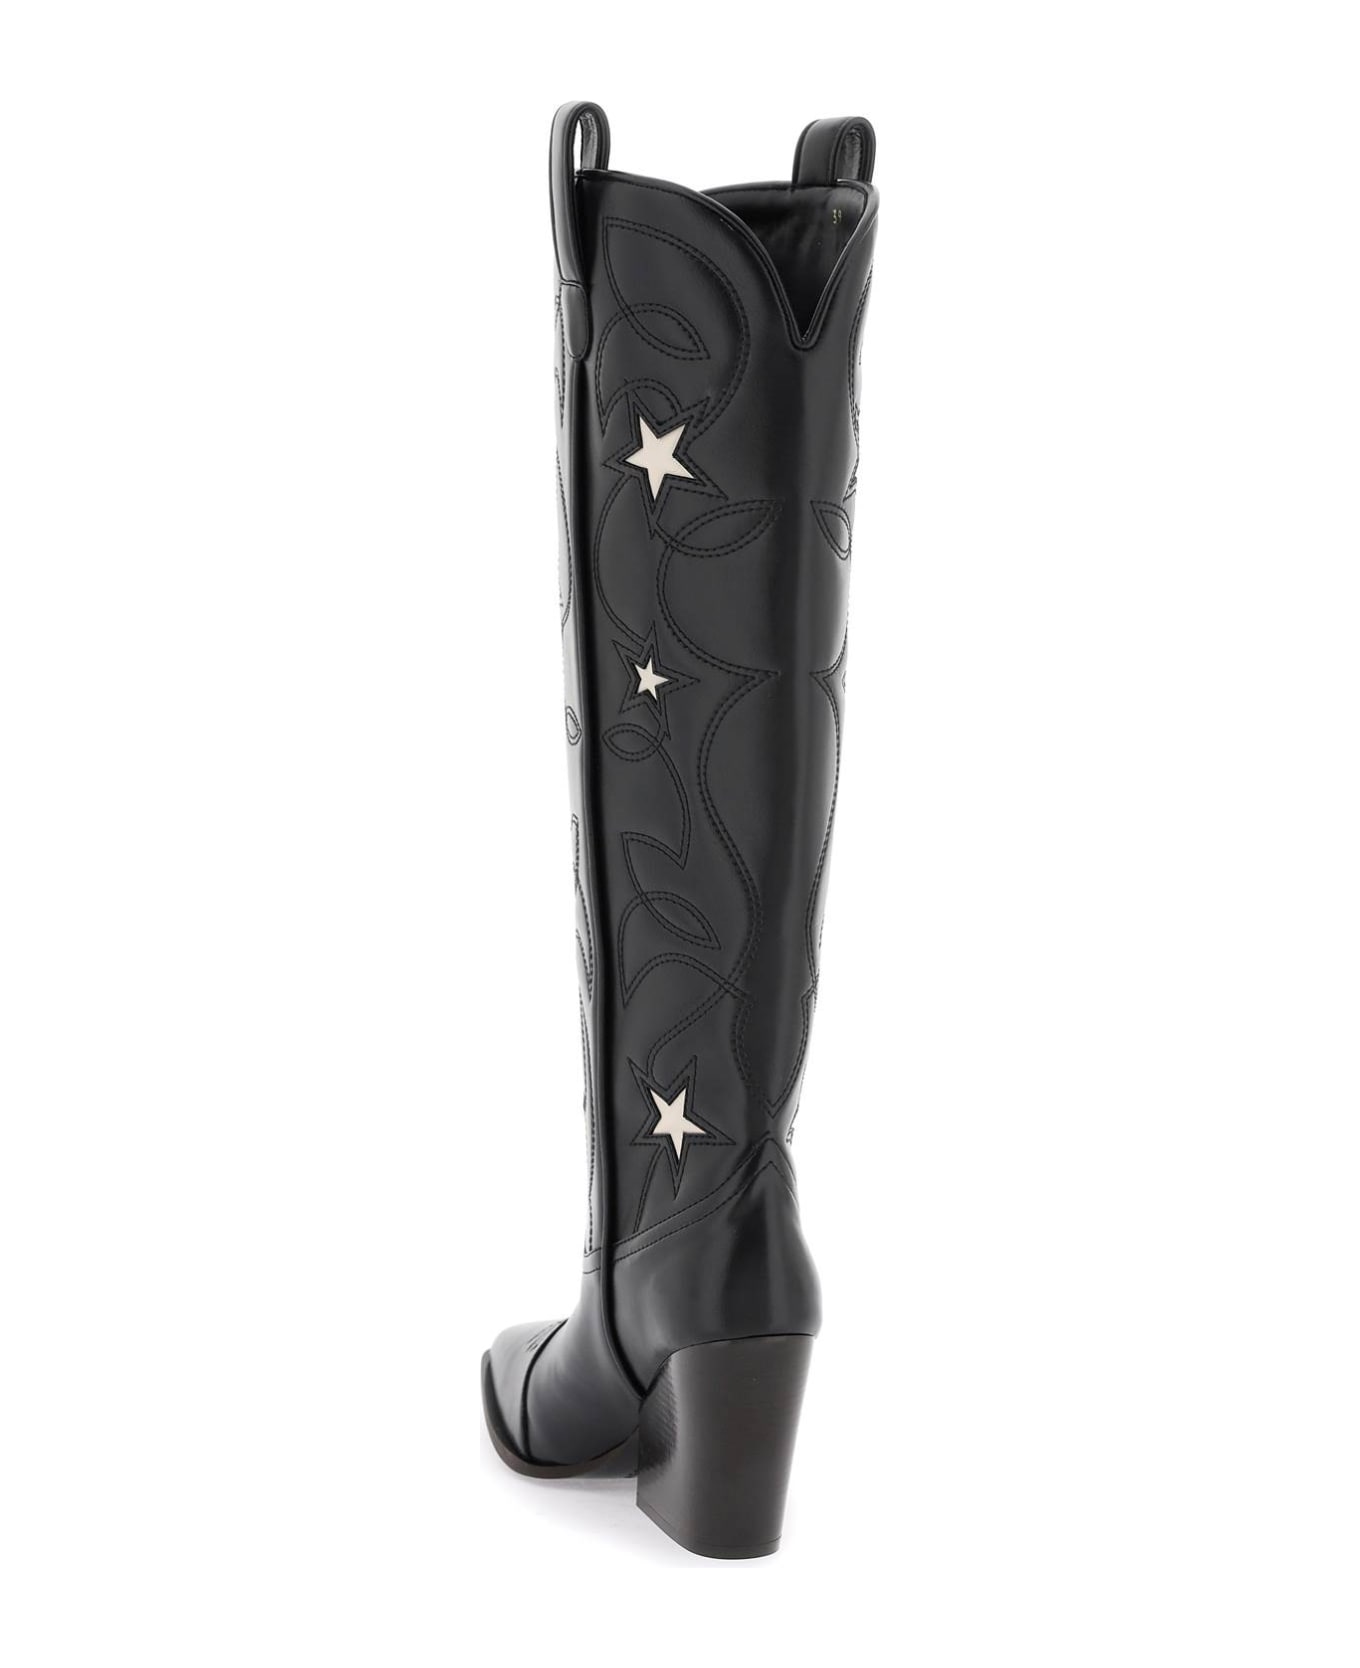 Stella McCartney Texan Boots With Star Embroidery - BLACK STONE (Black)